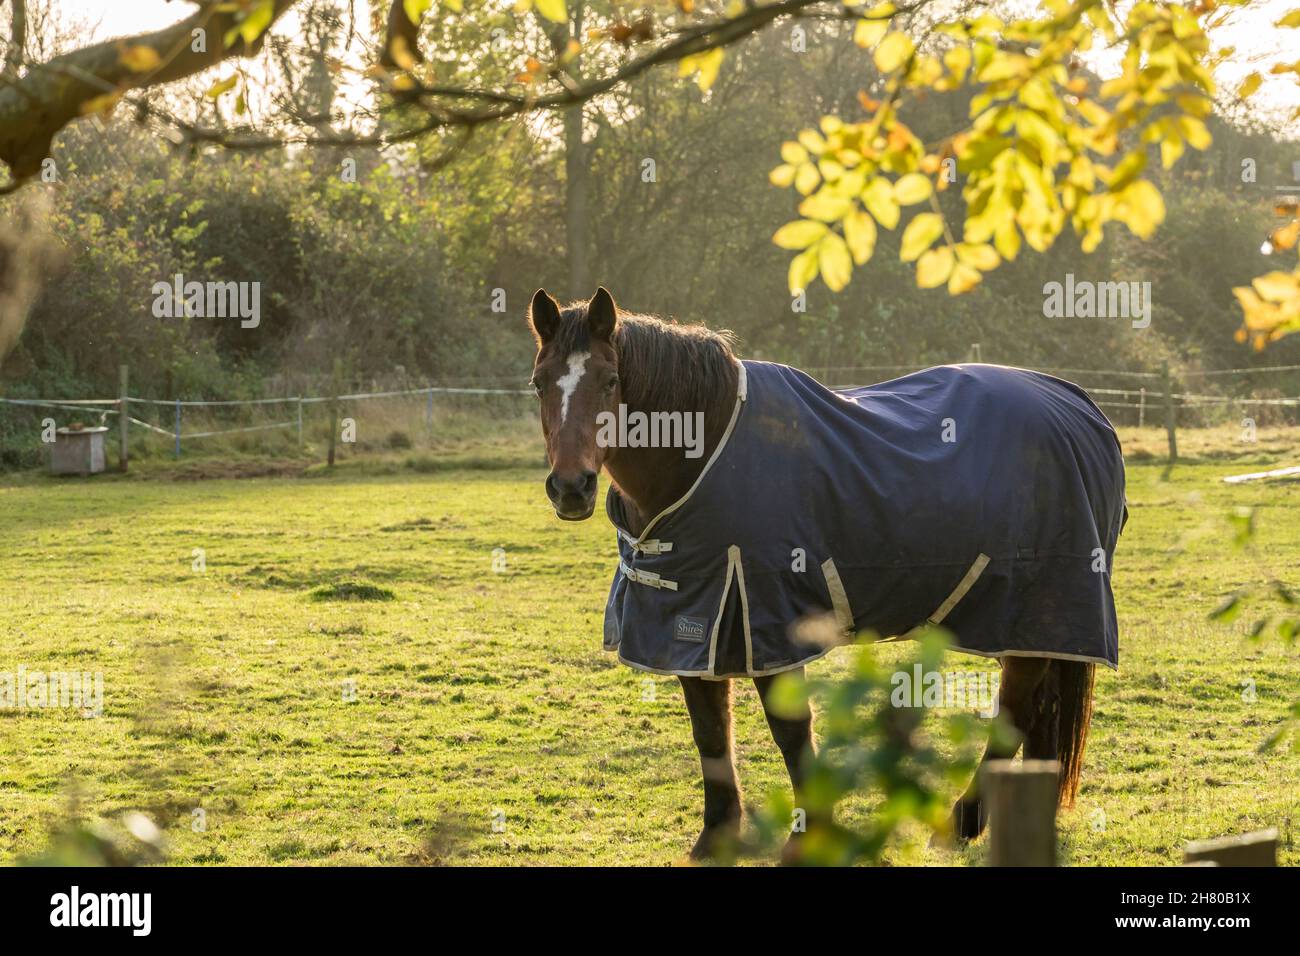 Horse in field wearing Shires coat to keep warm Stock Photo